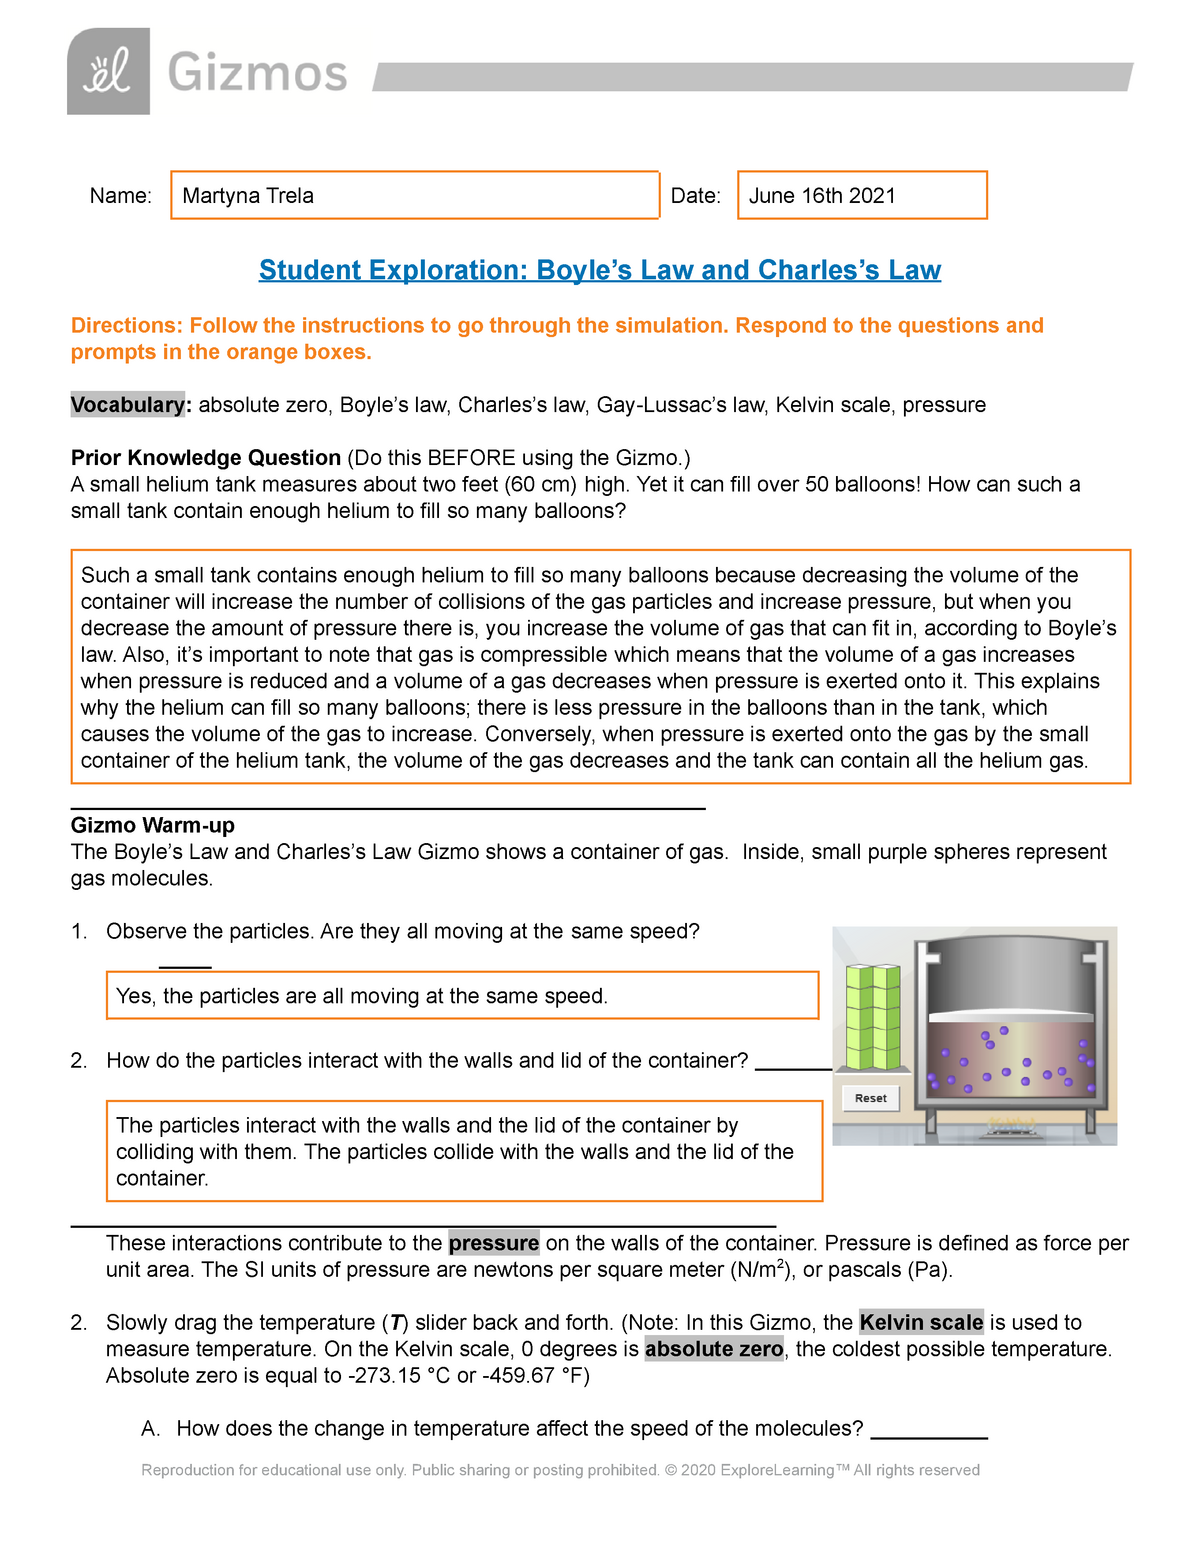 lab boyle's law assignment reflect on the lab